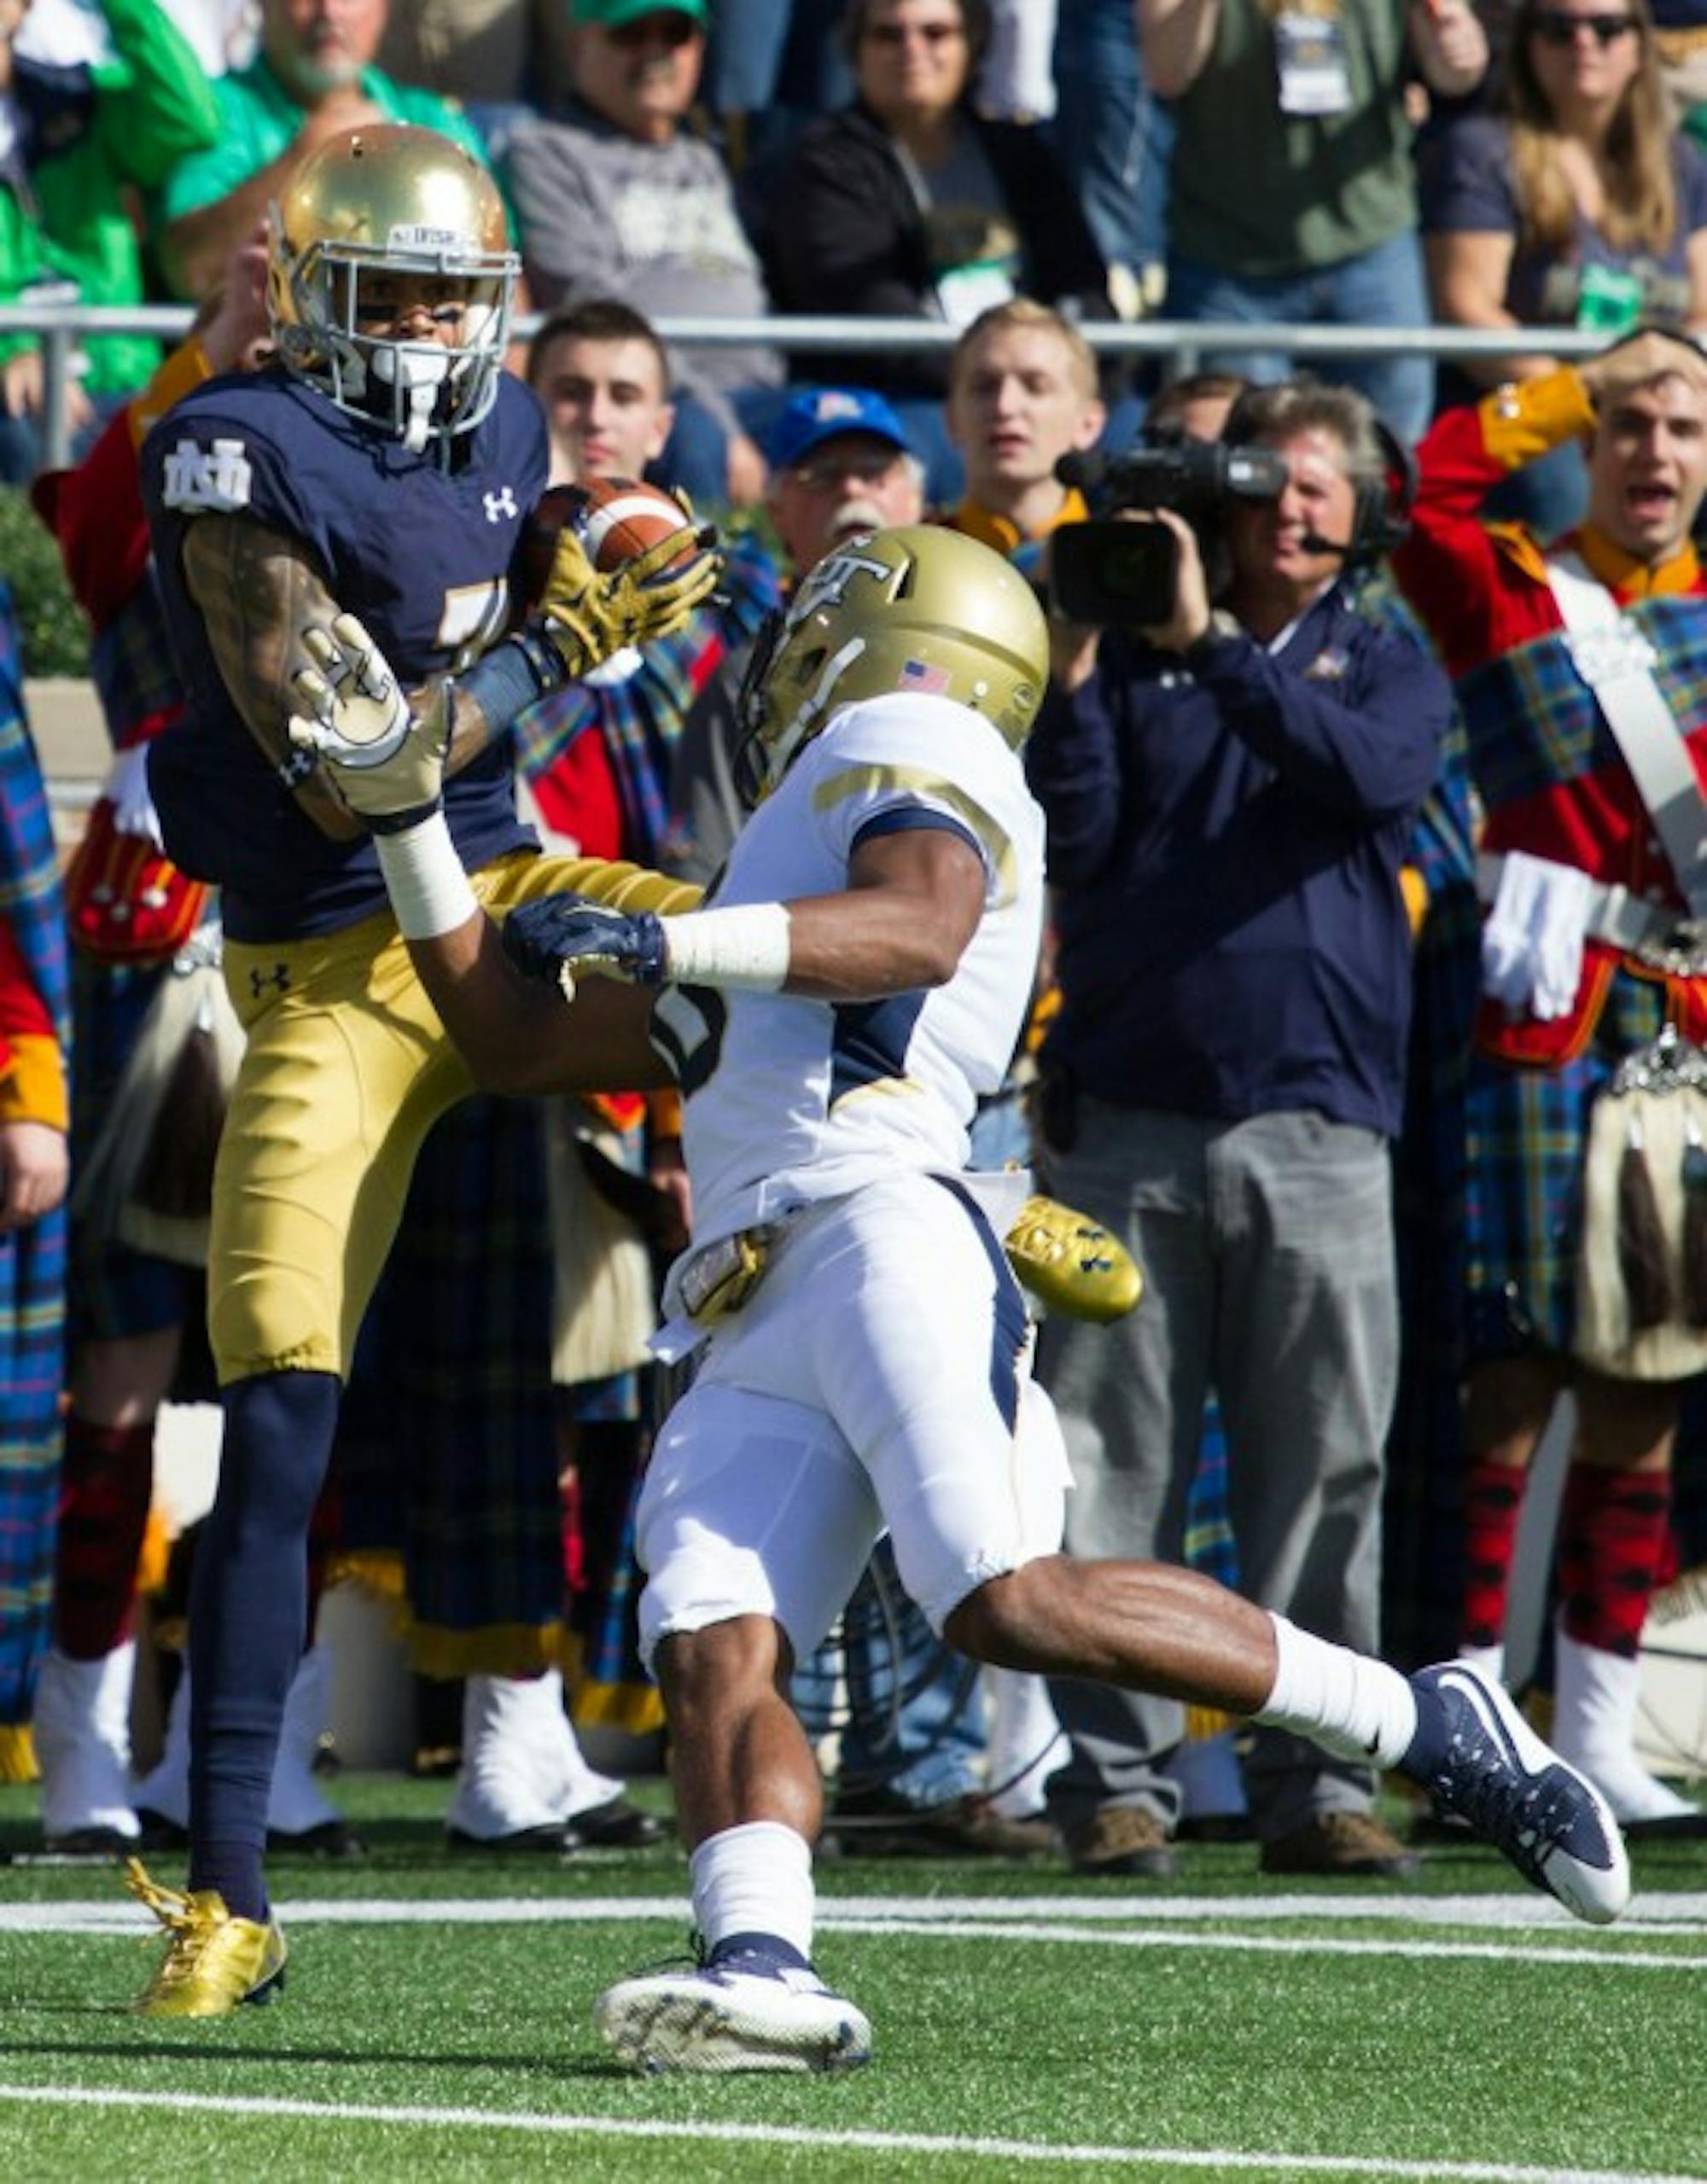 Fuller hauls in a touchdown during Notre Dame’s 30-22 win over Georgia Tech on Sept. 19.